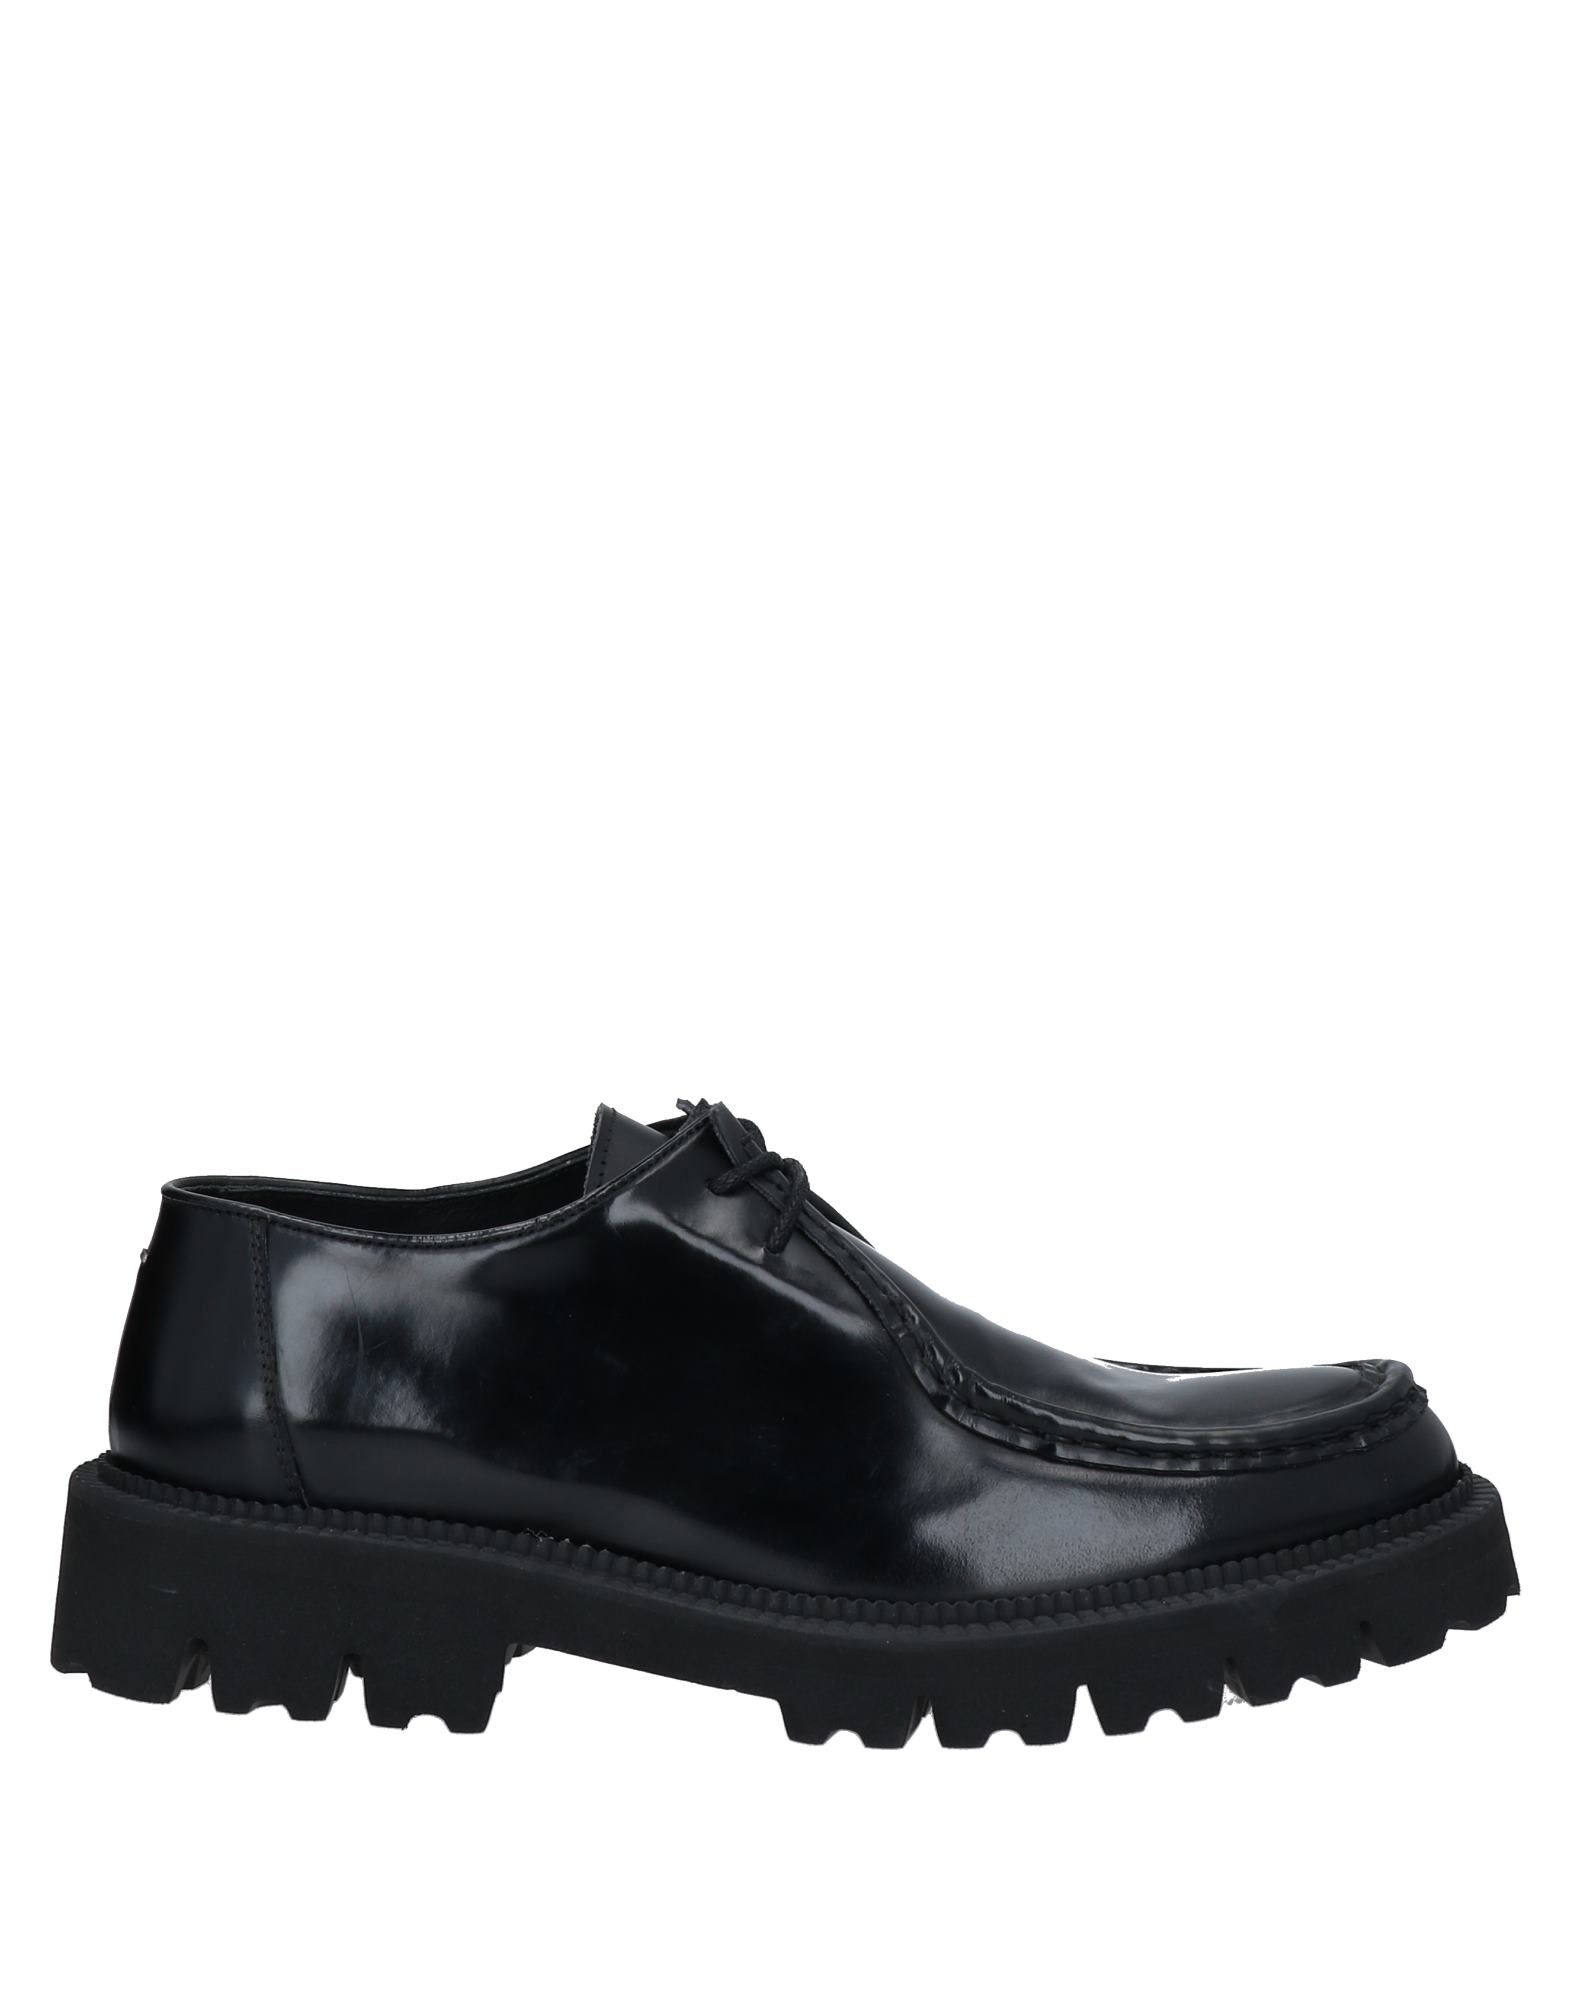 LOW BRAND LOW BRAND MAN LACE-UP SHOES BLACK SIZE 7 SOFT LEATHER,17047856TO 7